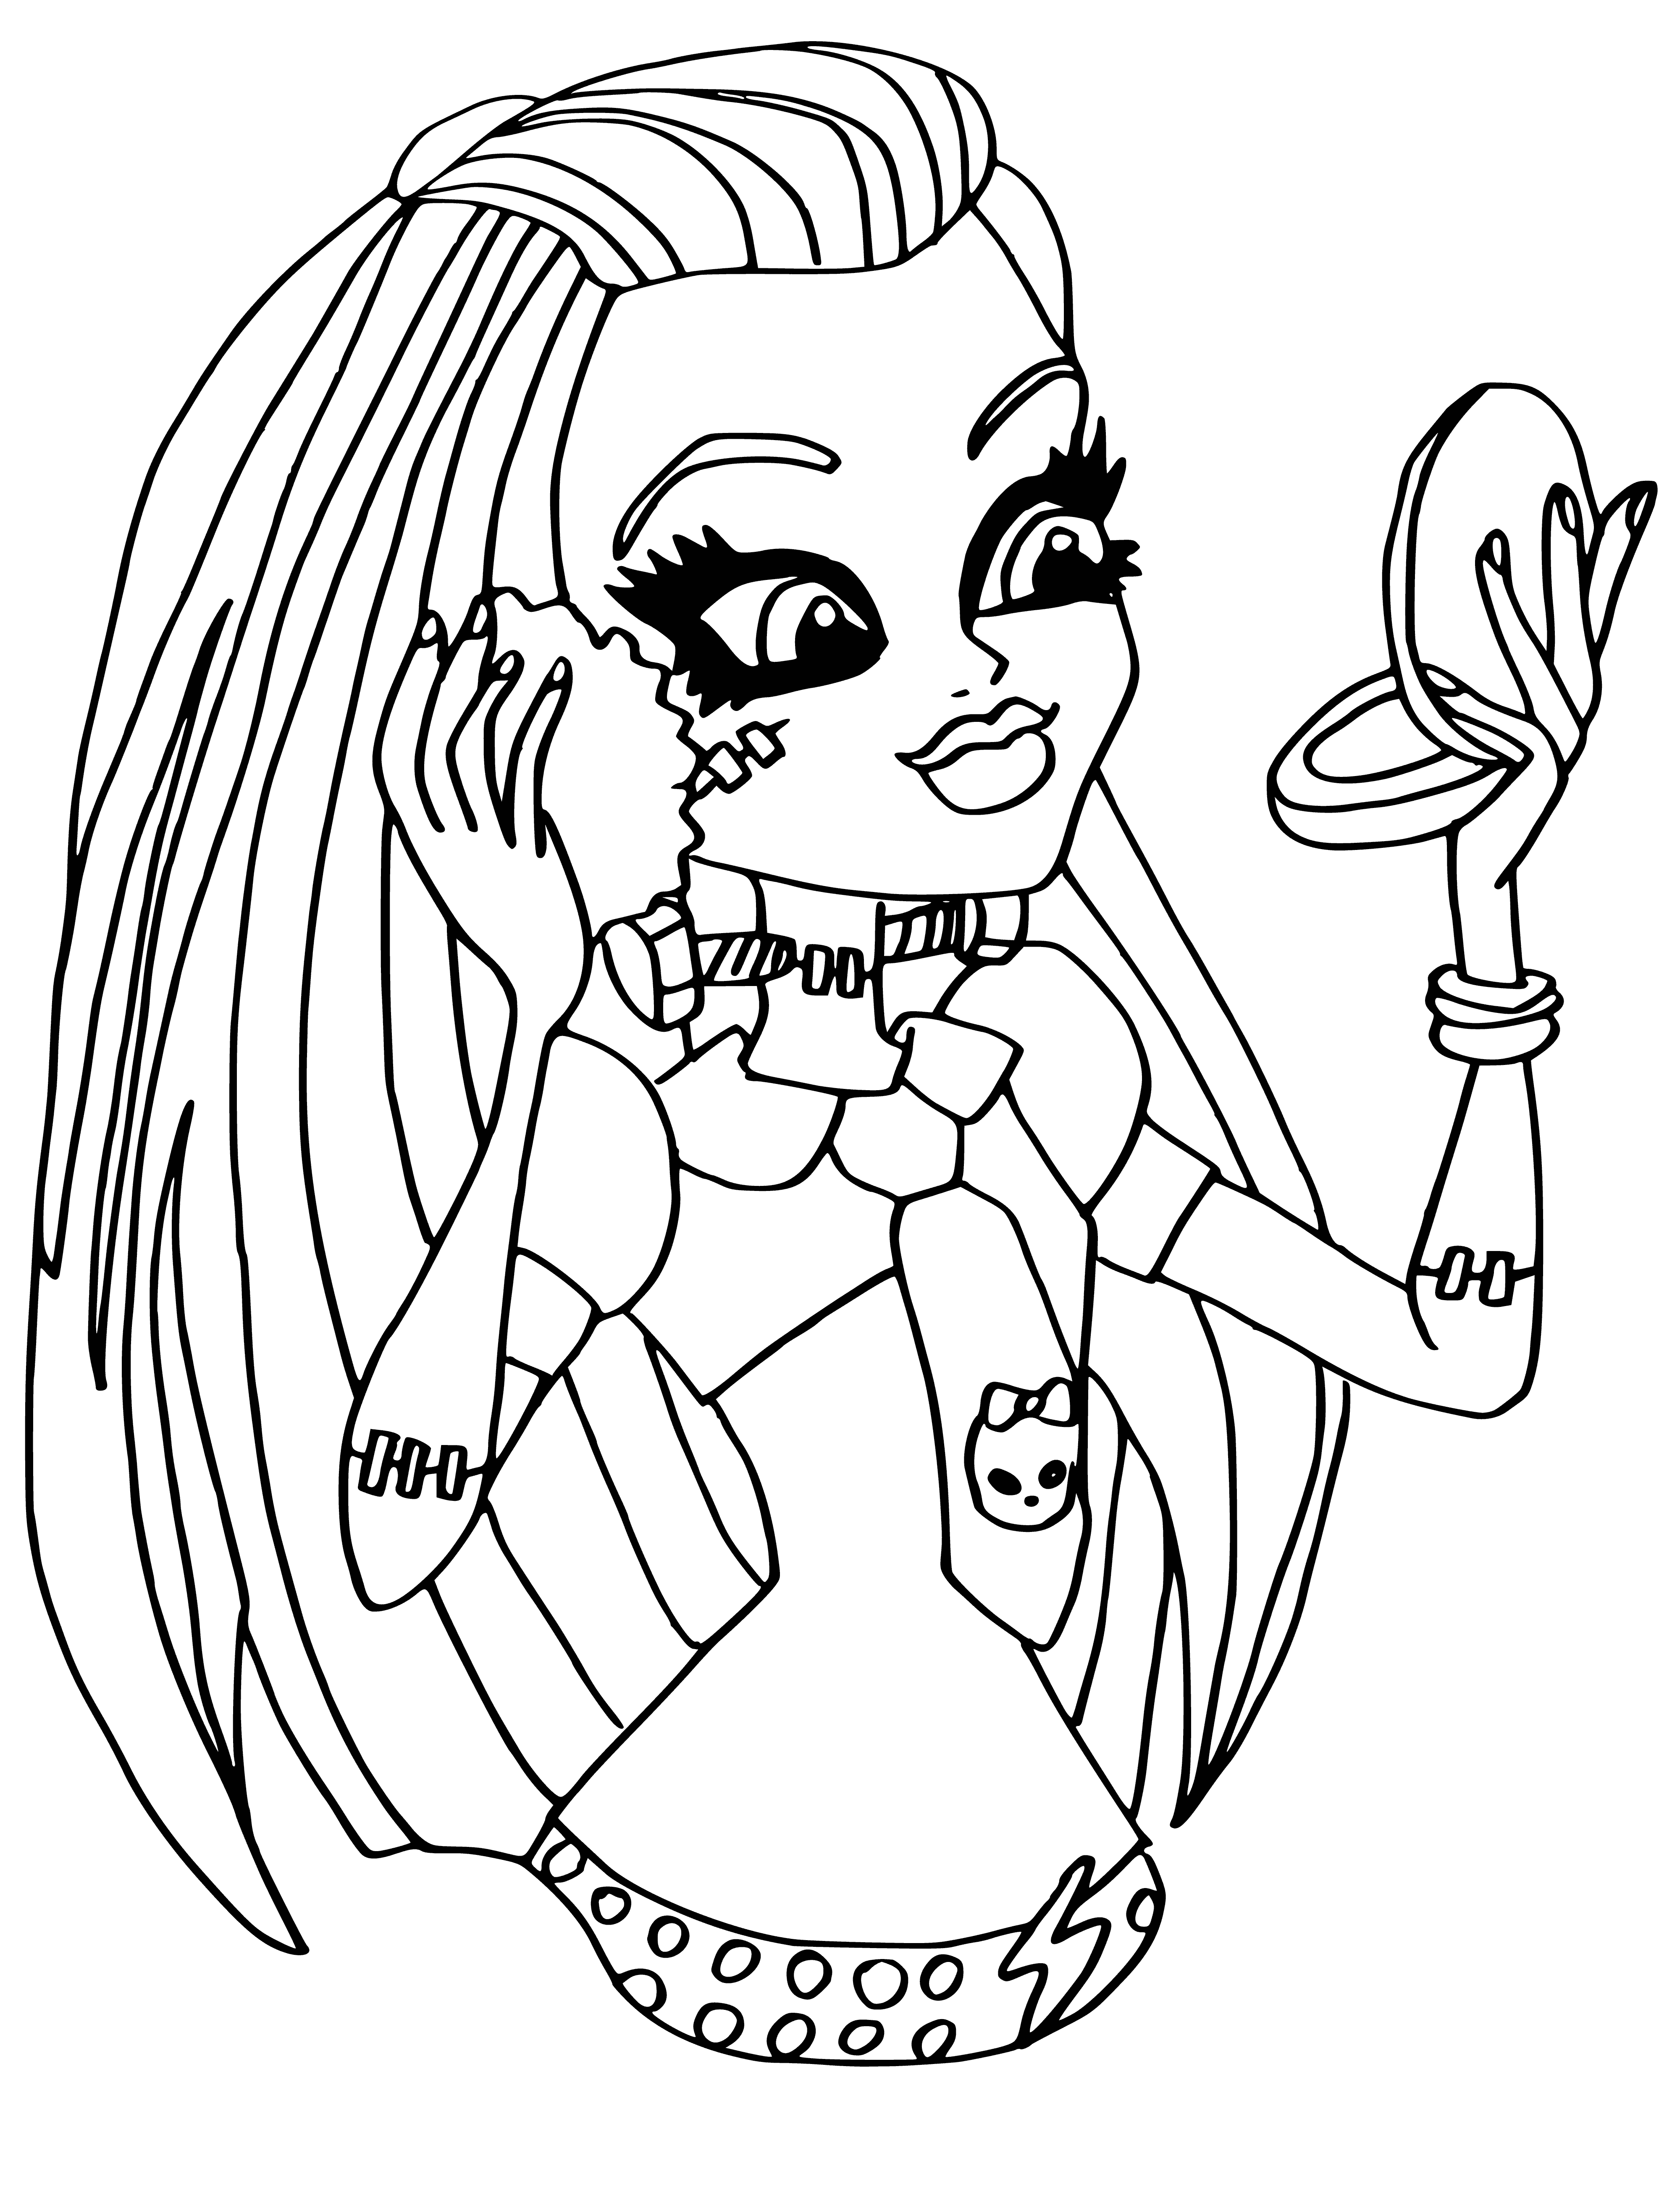 Frankie Stein is powdering coloring page